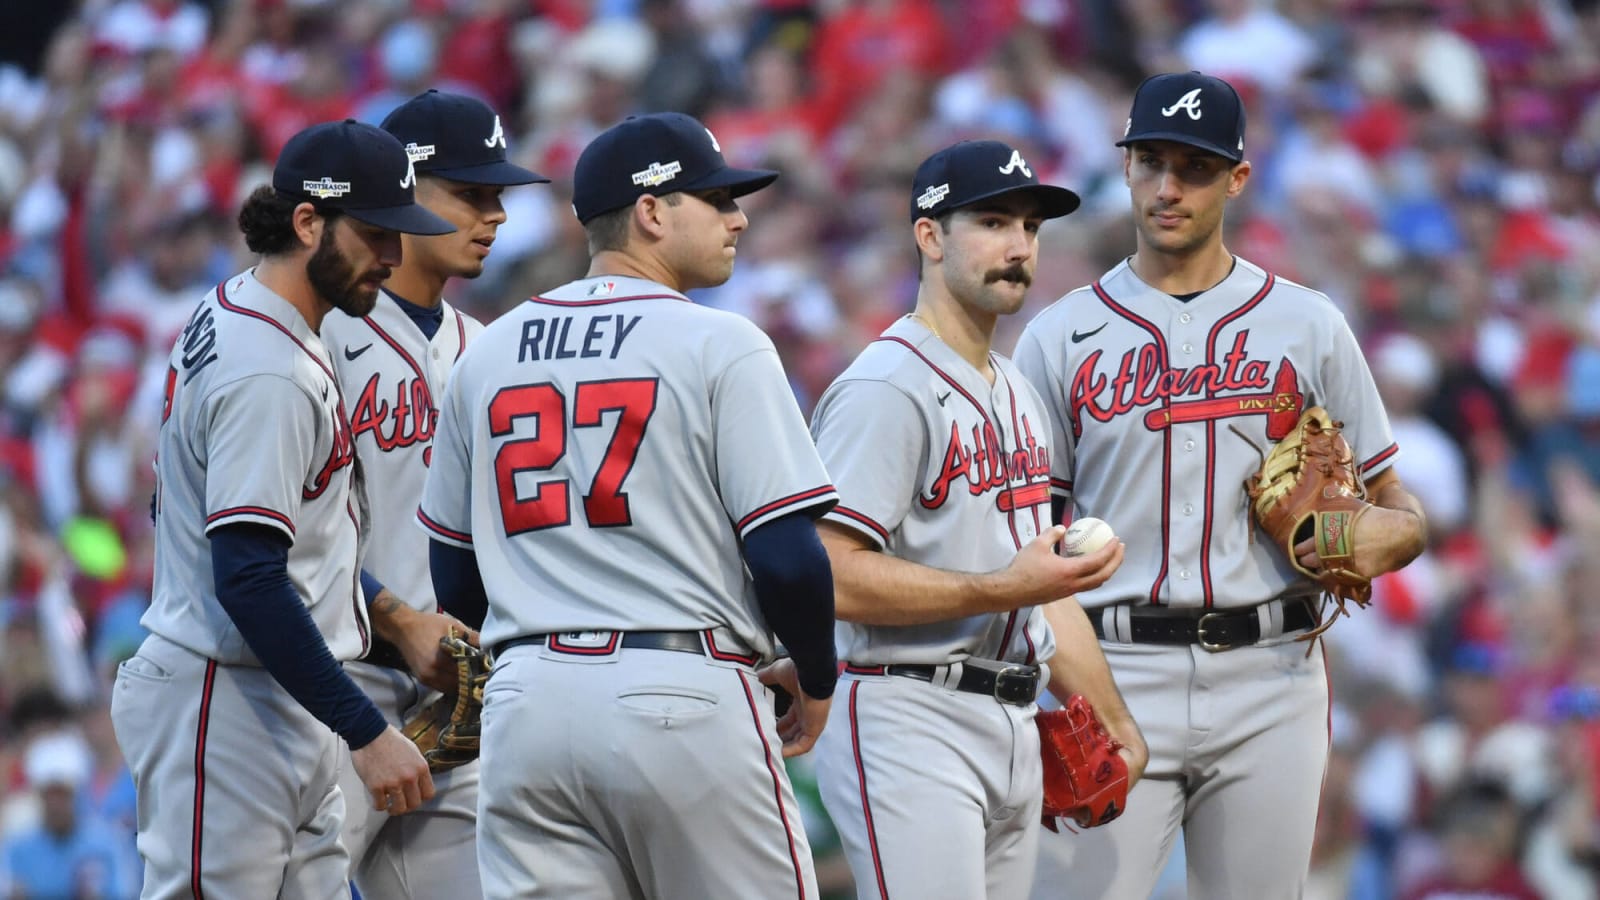 MLB insider on which team is the cream of the crop in the NL East